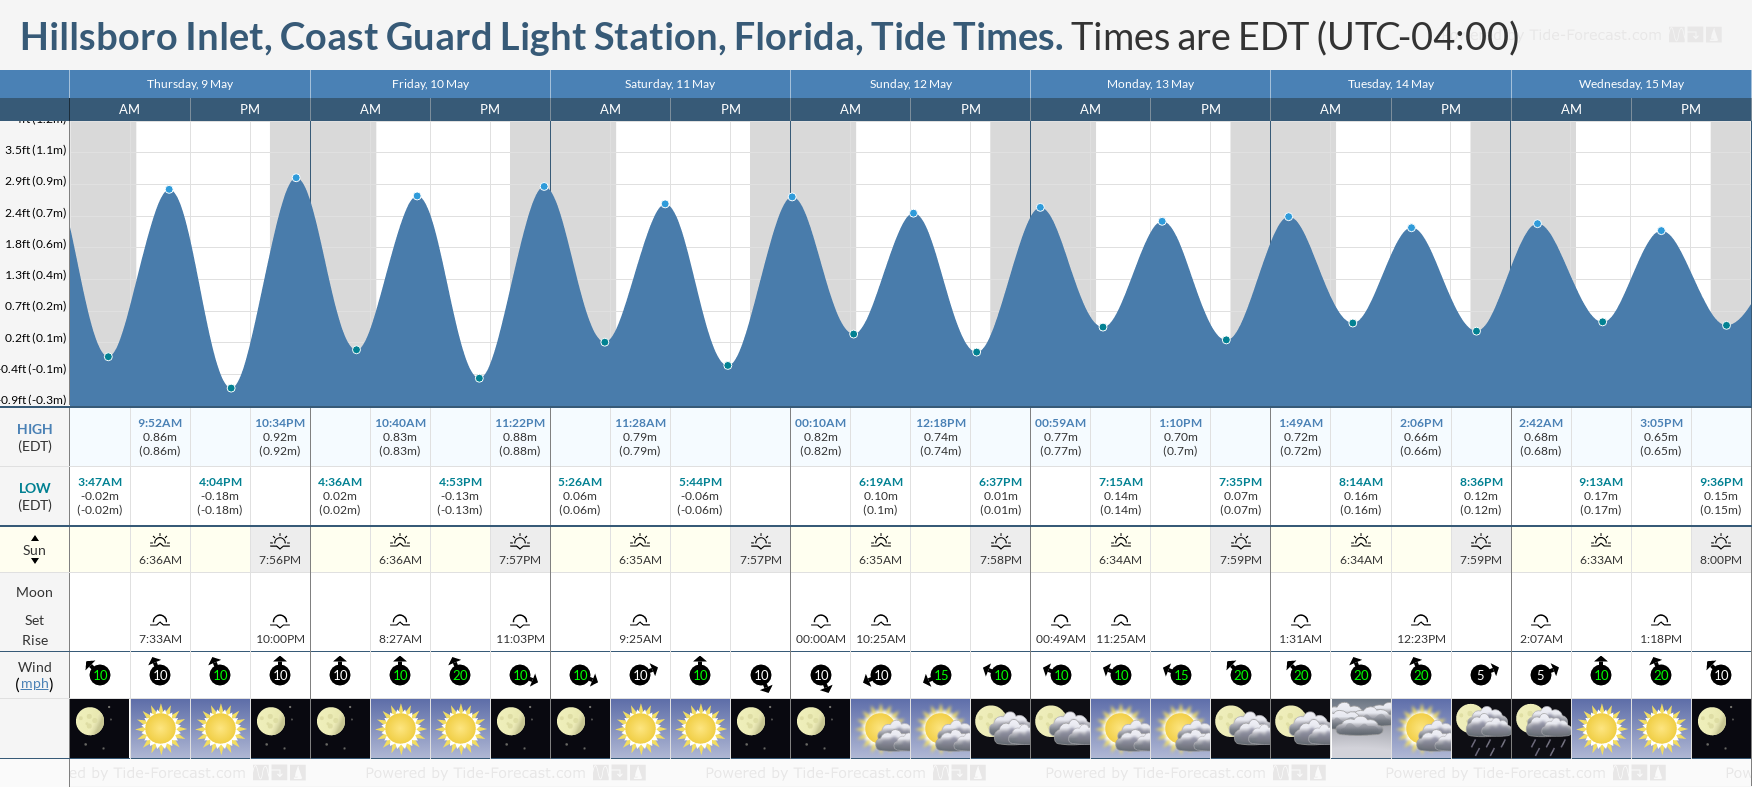 Hillsboro Inlet, Coast Guard Light Station, Florida Tide Chart including high and low tide times for the next 7 days